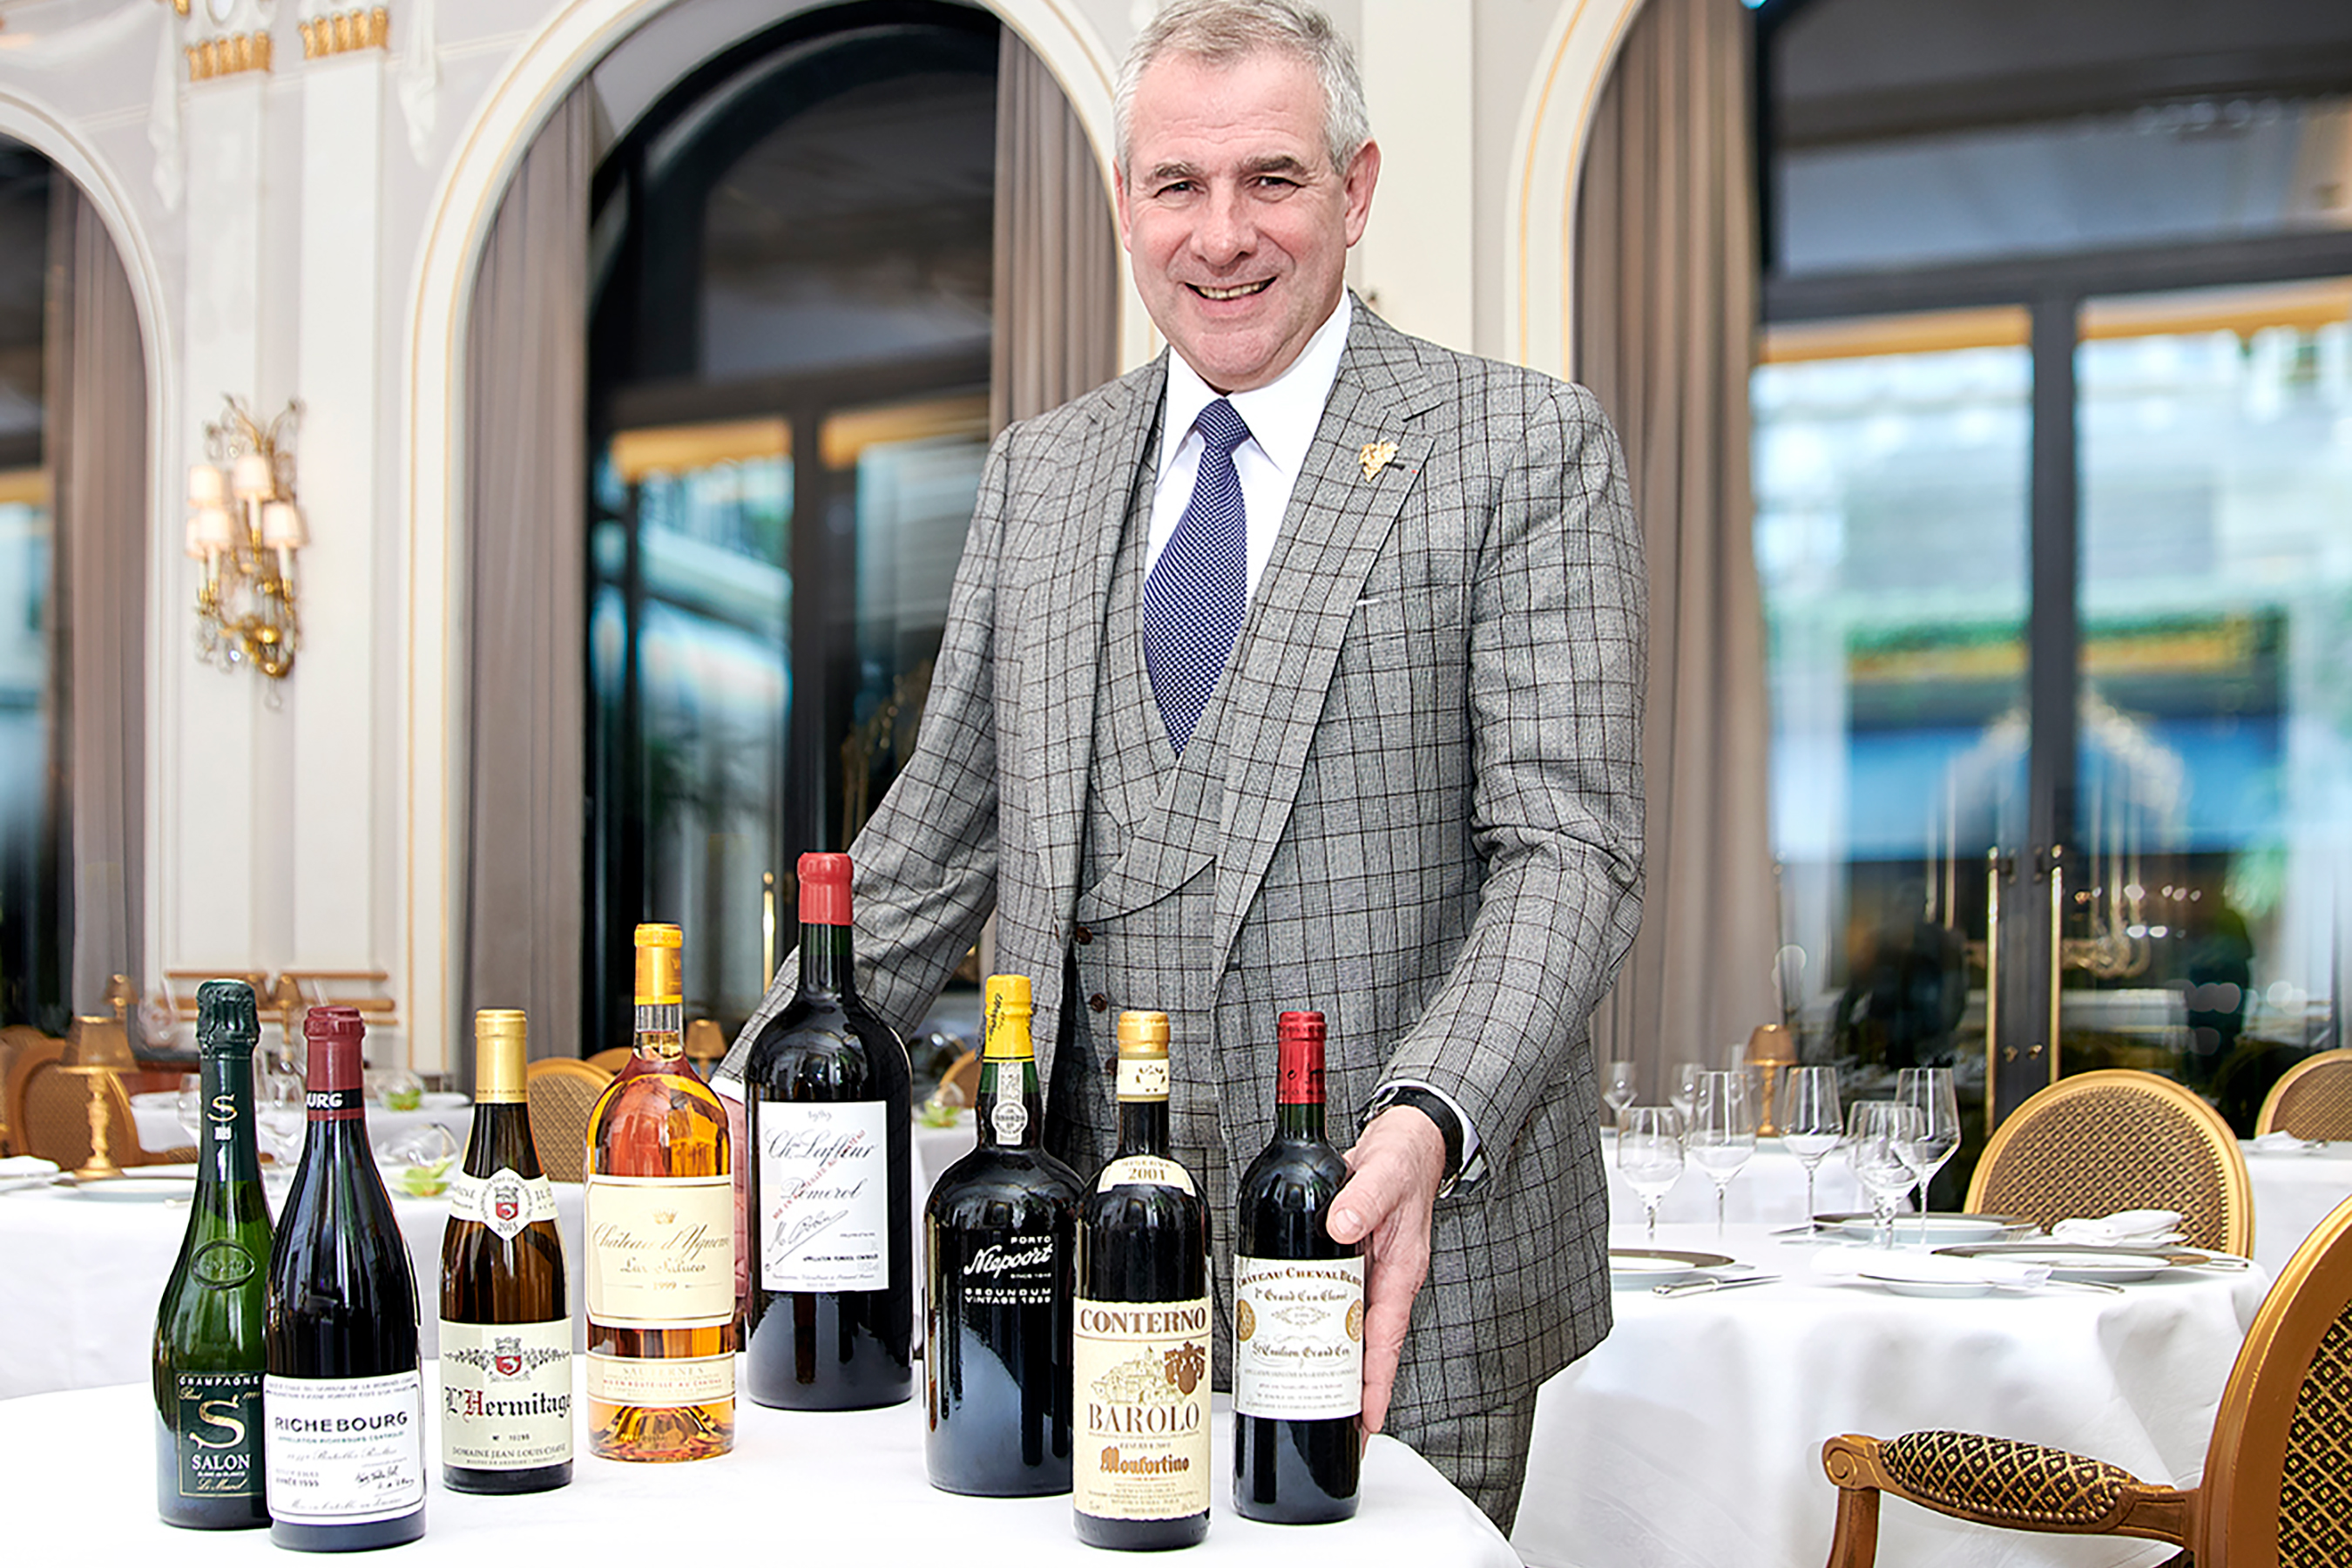 Eric Beaumard, Sommelier of the World silver medallist
Learn about some of the world’s finest wines with Eric Beaumard